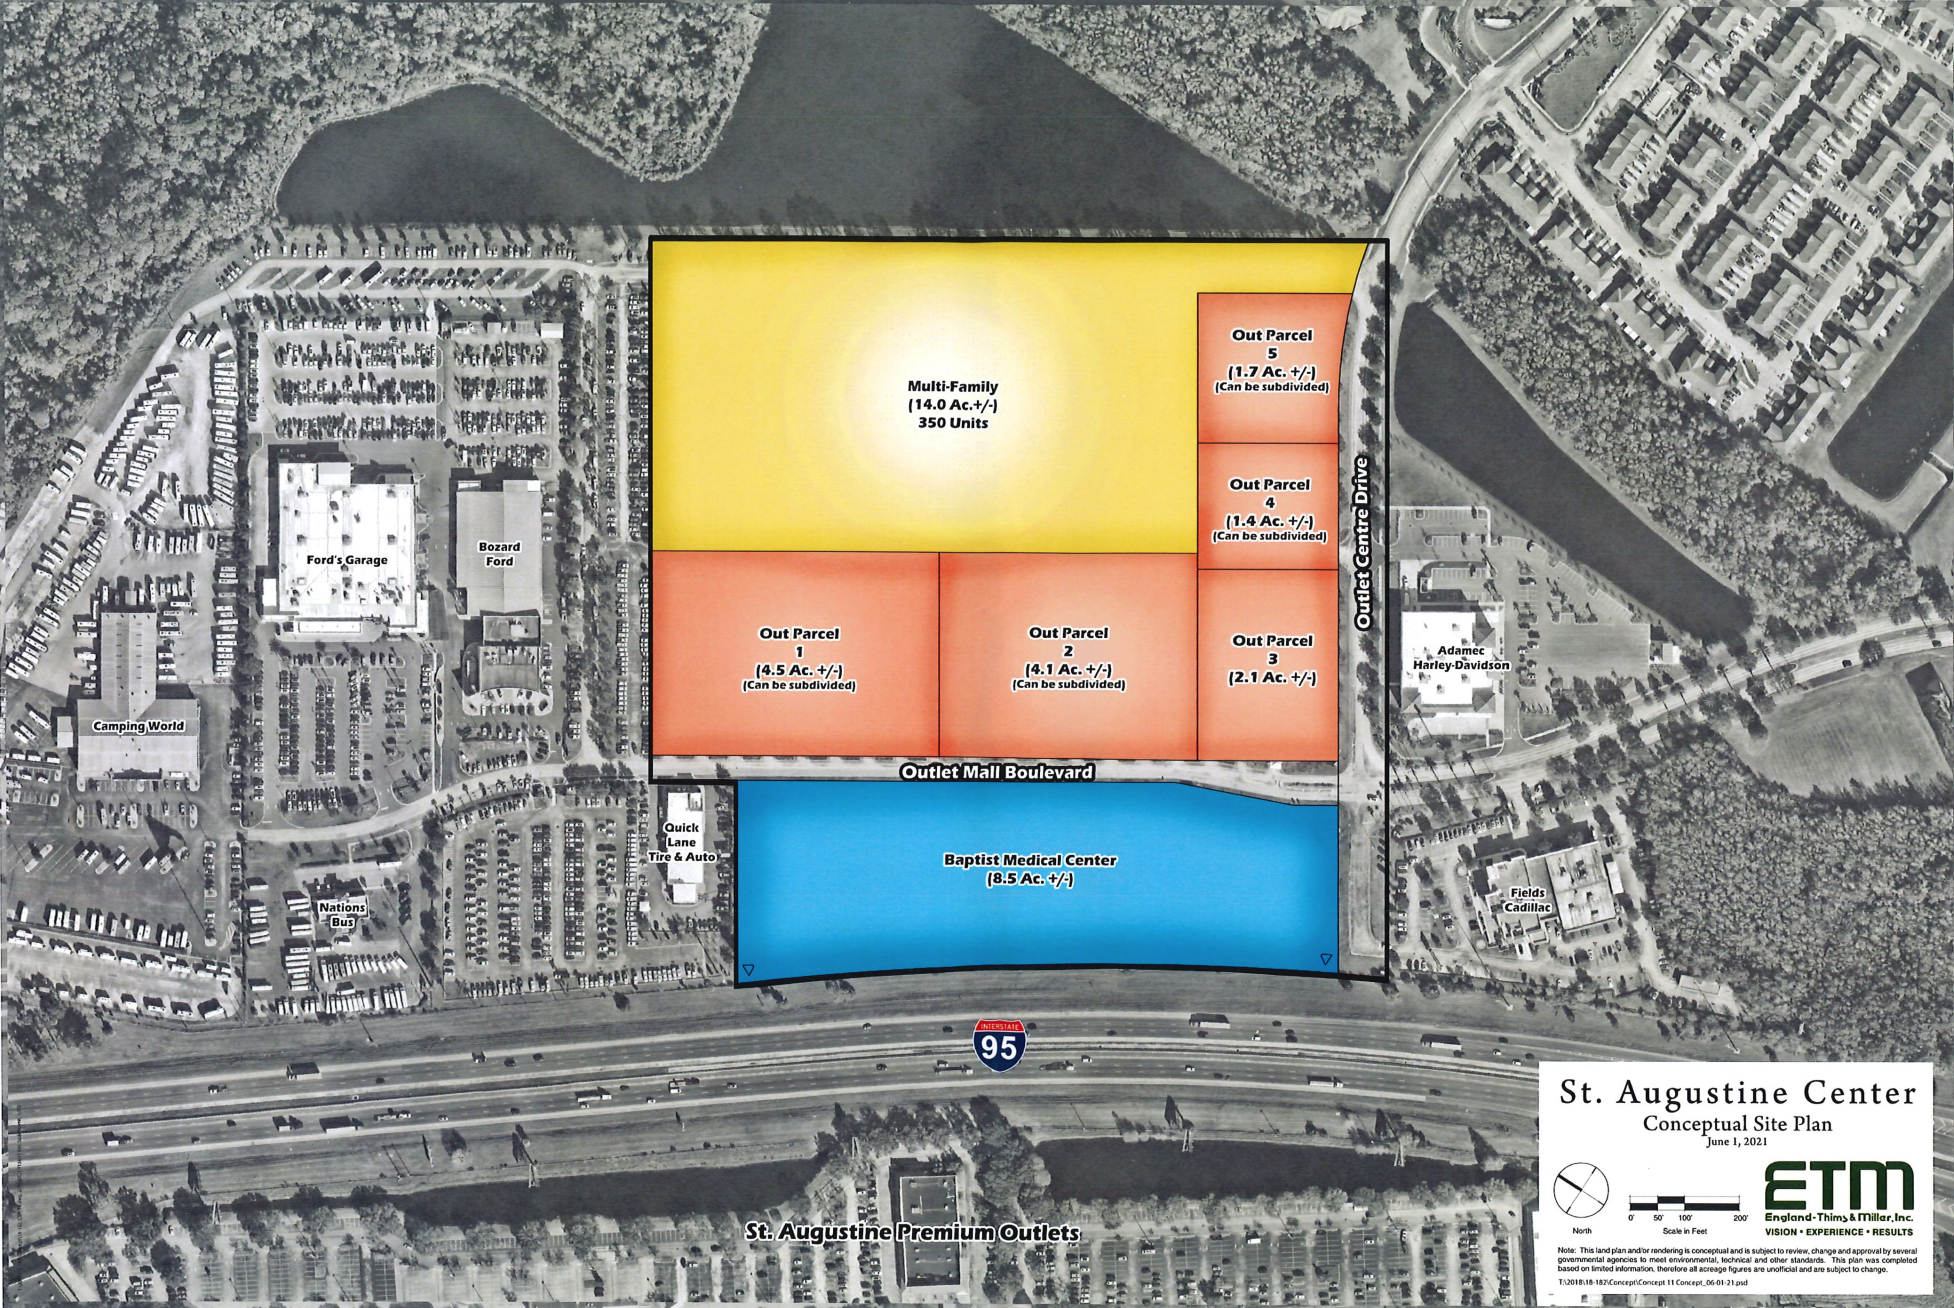 A conceptual site plan of St. Augustine Centre at Interstate 95 and Florida 16 in St. Johns County.